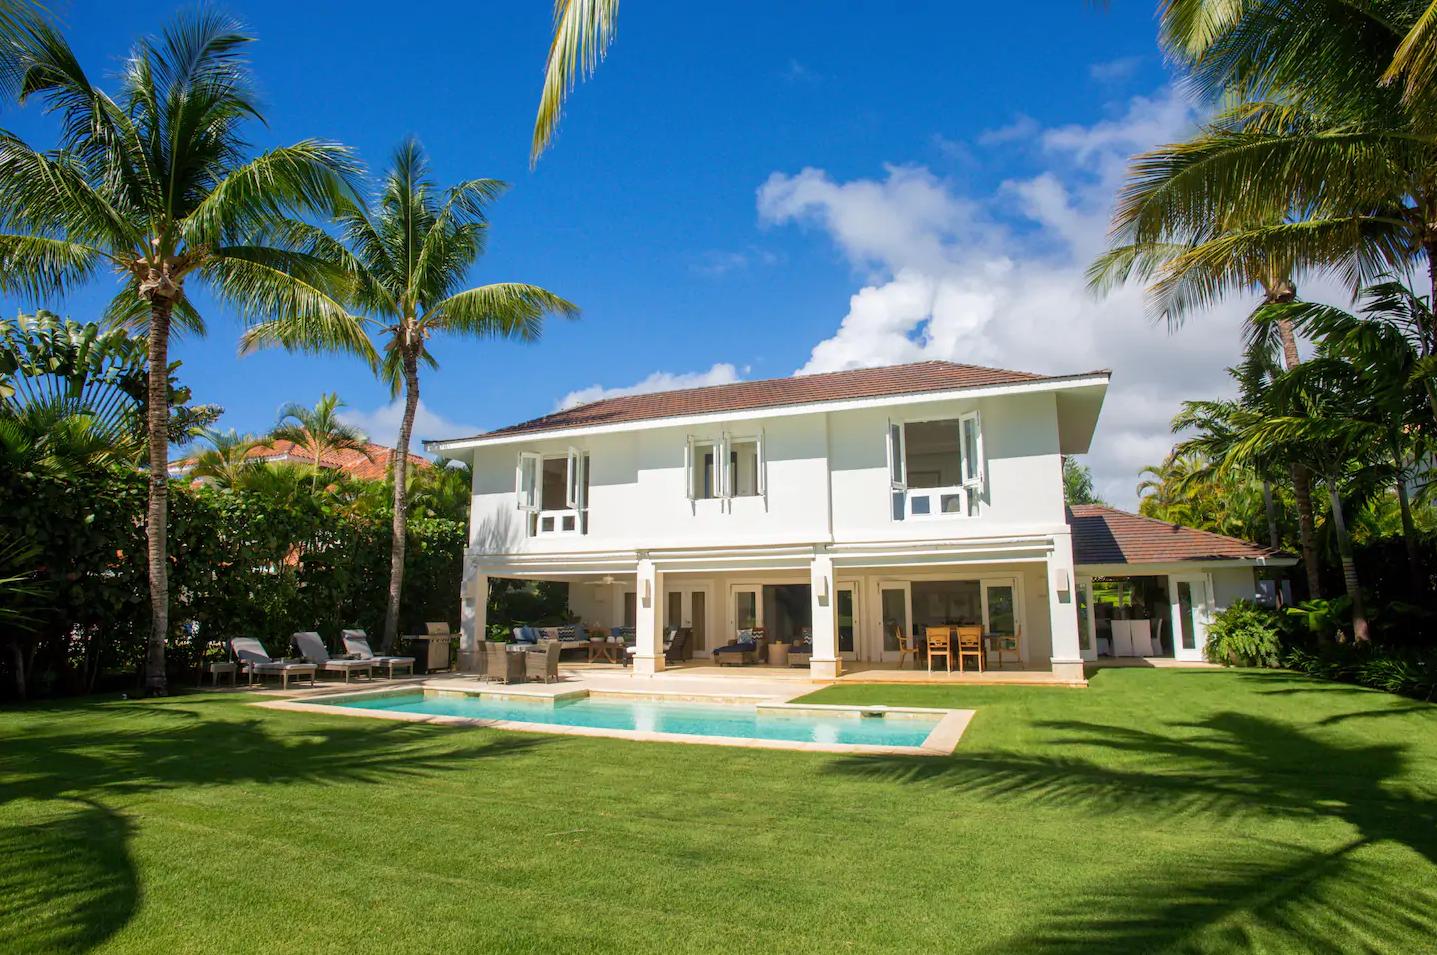 Property Image 1 - Beautiful Bright Villa with a Spacious Pool Area